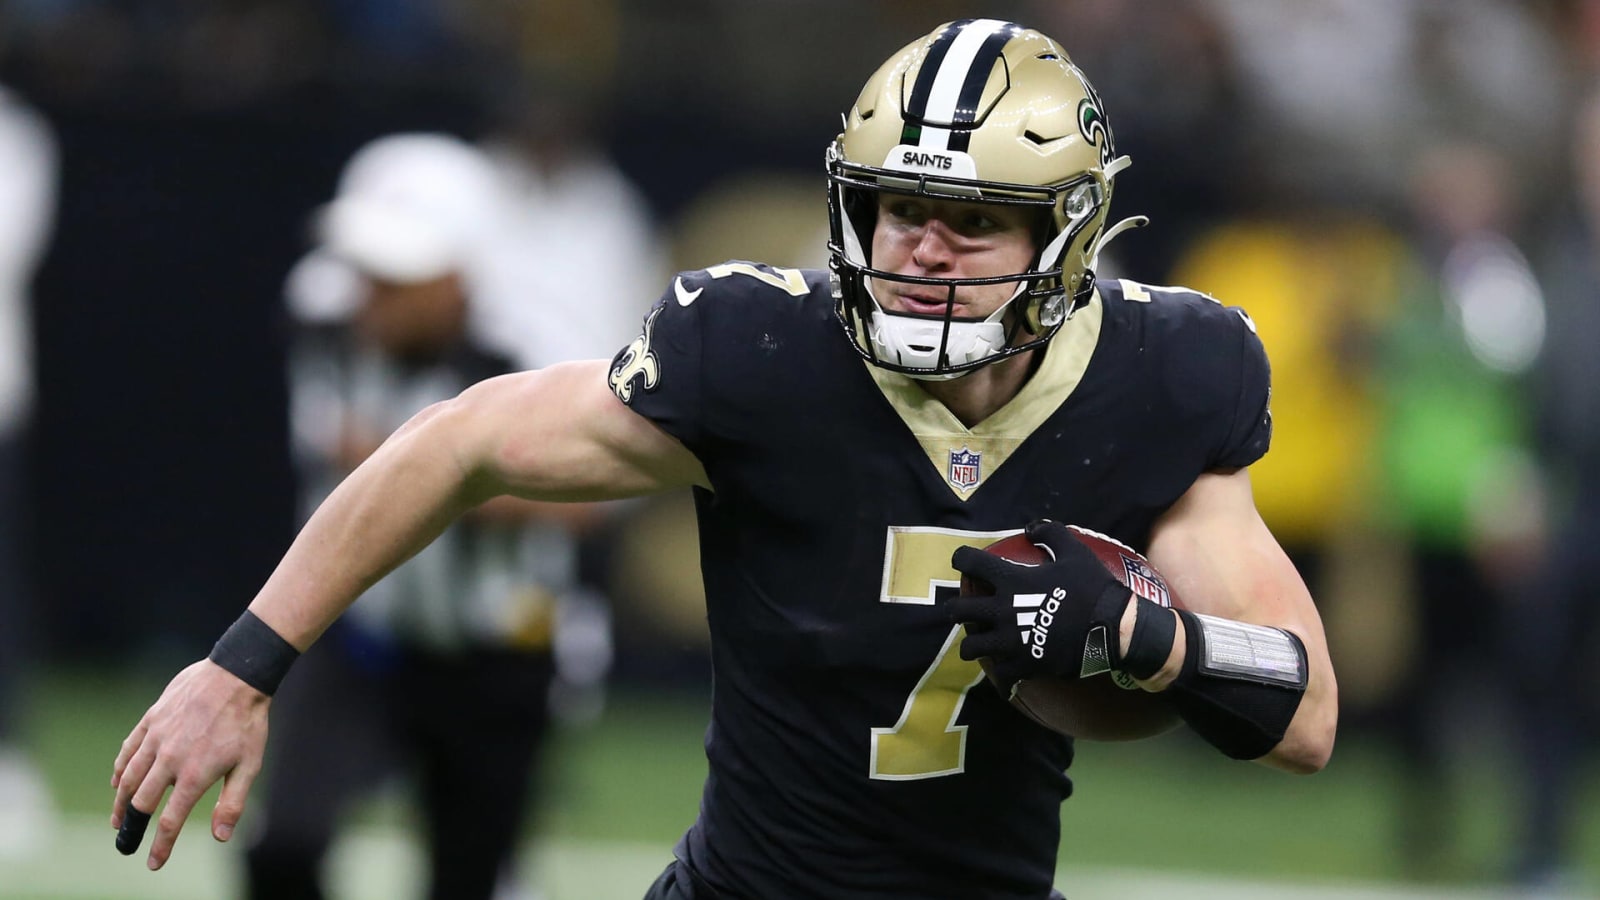 Saints HC Dennis Allen: Plan is for Taysom Hill to focus on TE